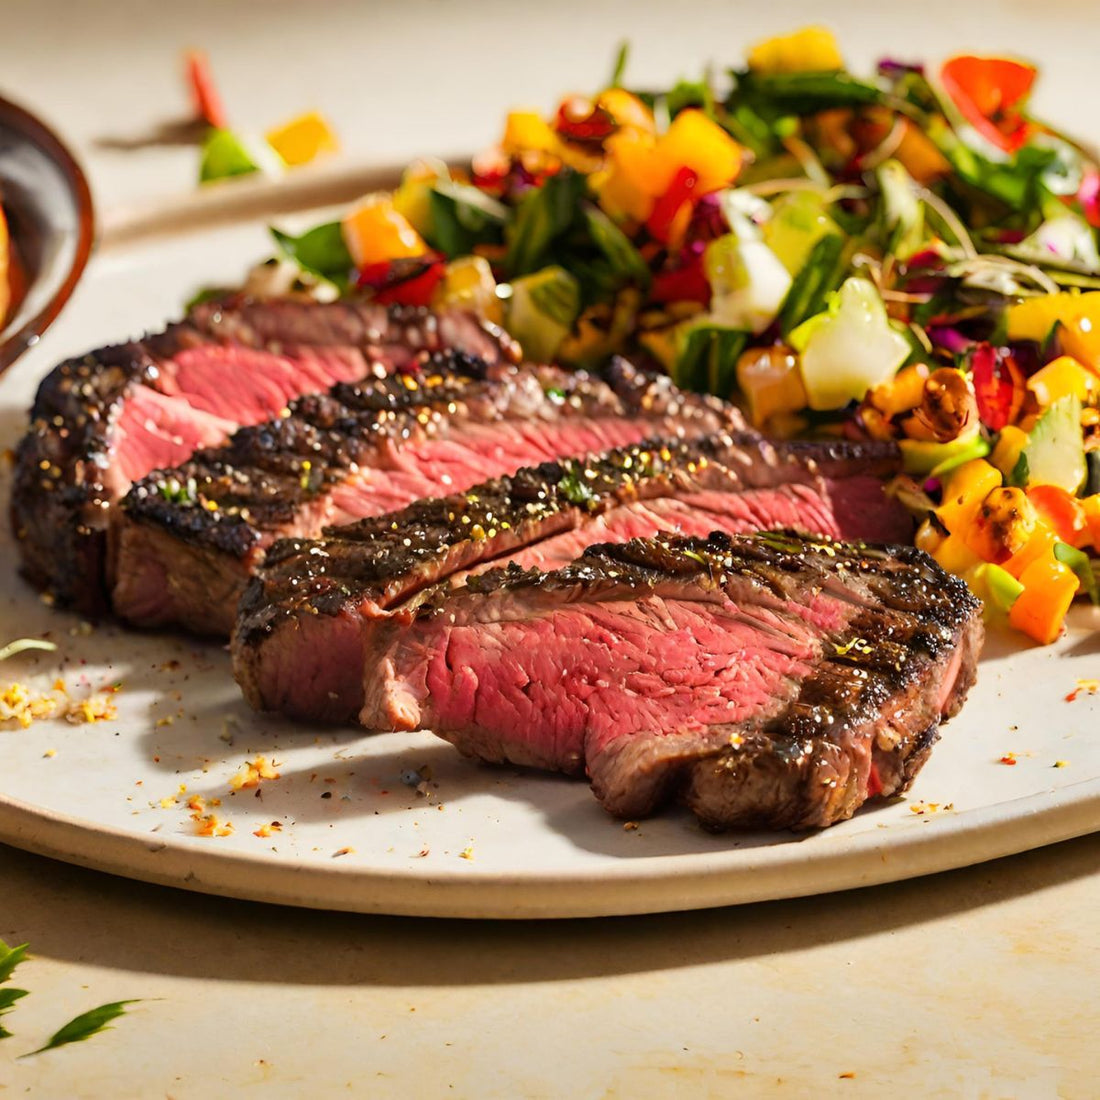 What Is a Kona-Crusted Steak? Steak Crusted With Coffee and Spices